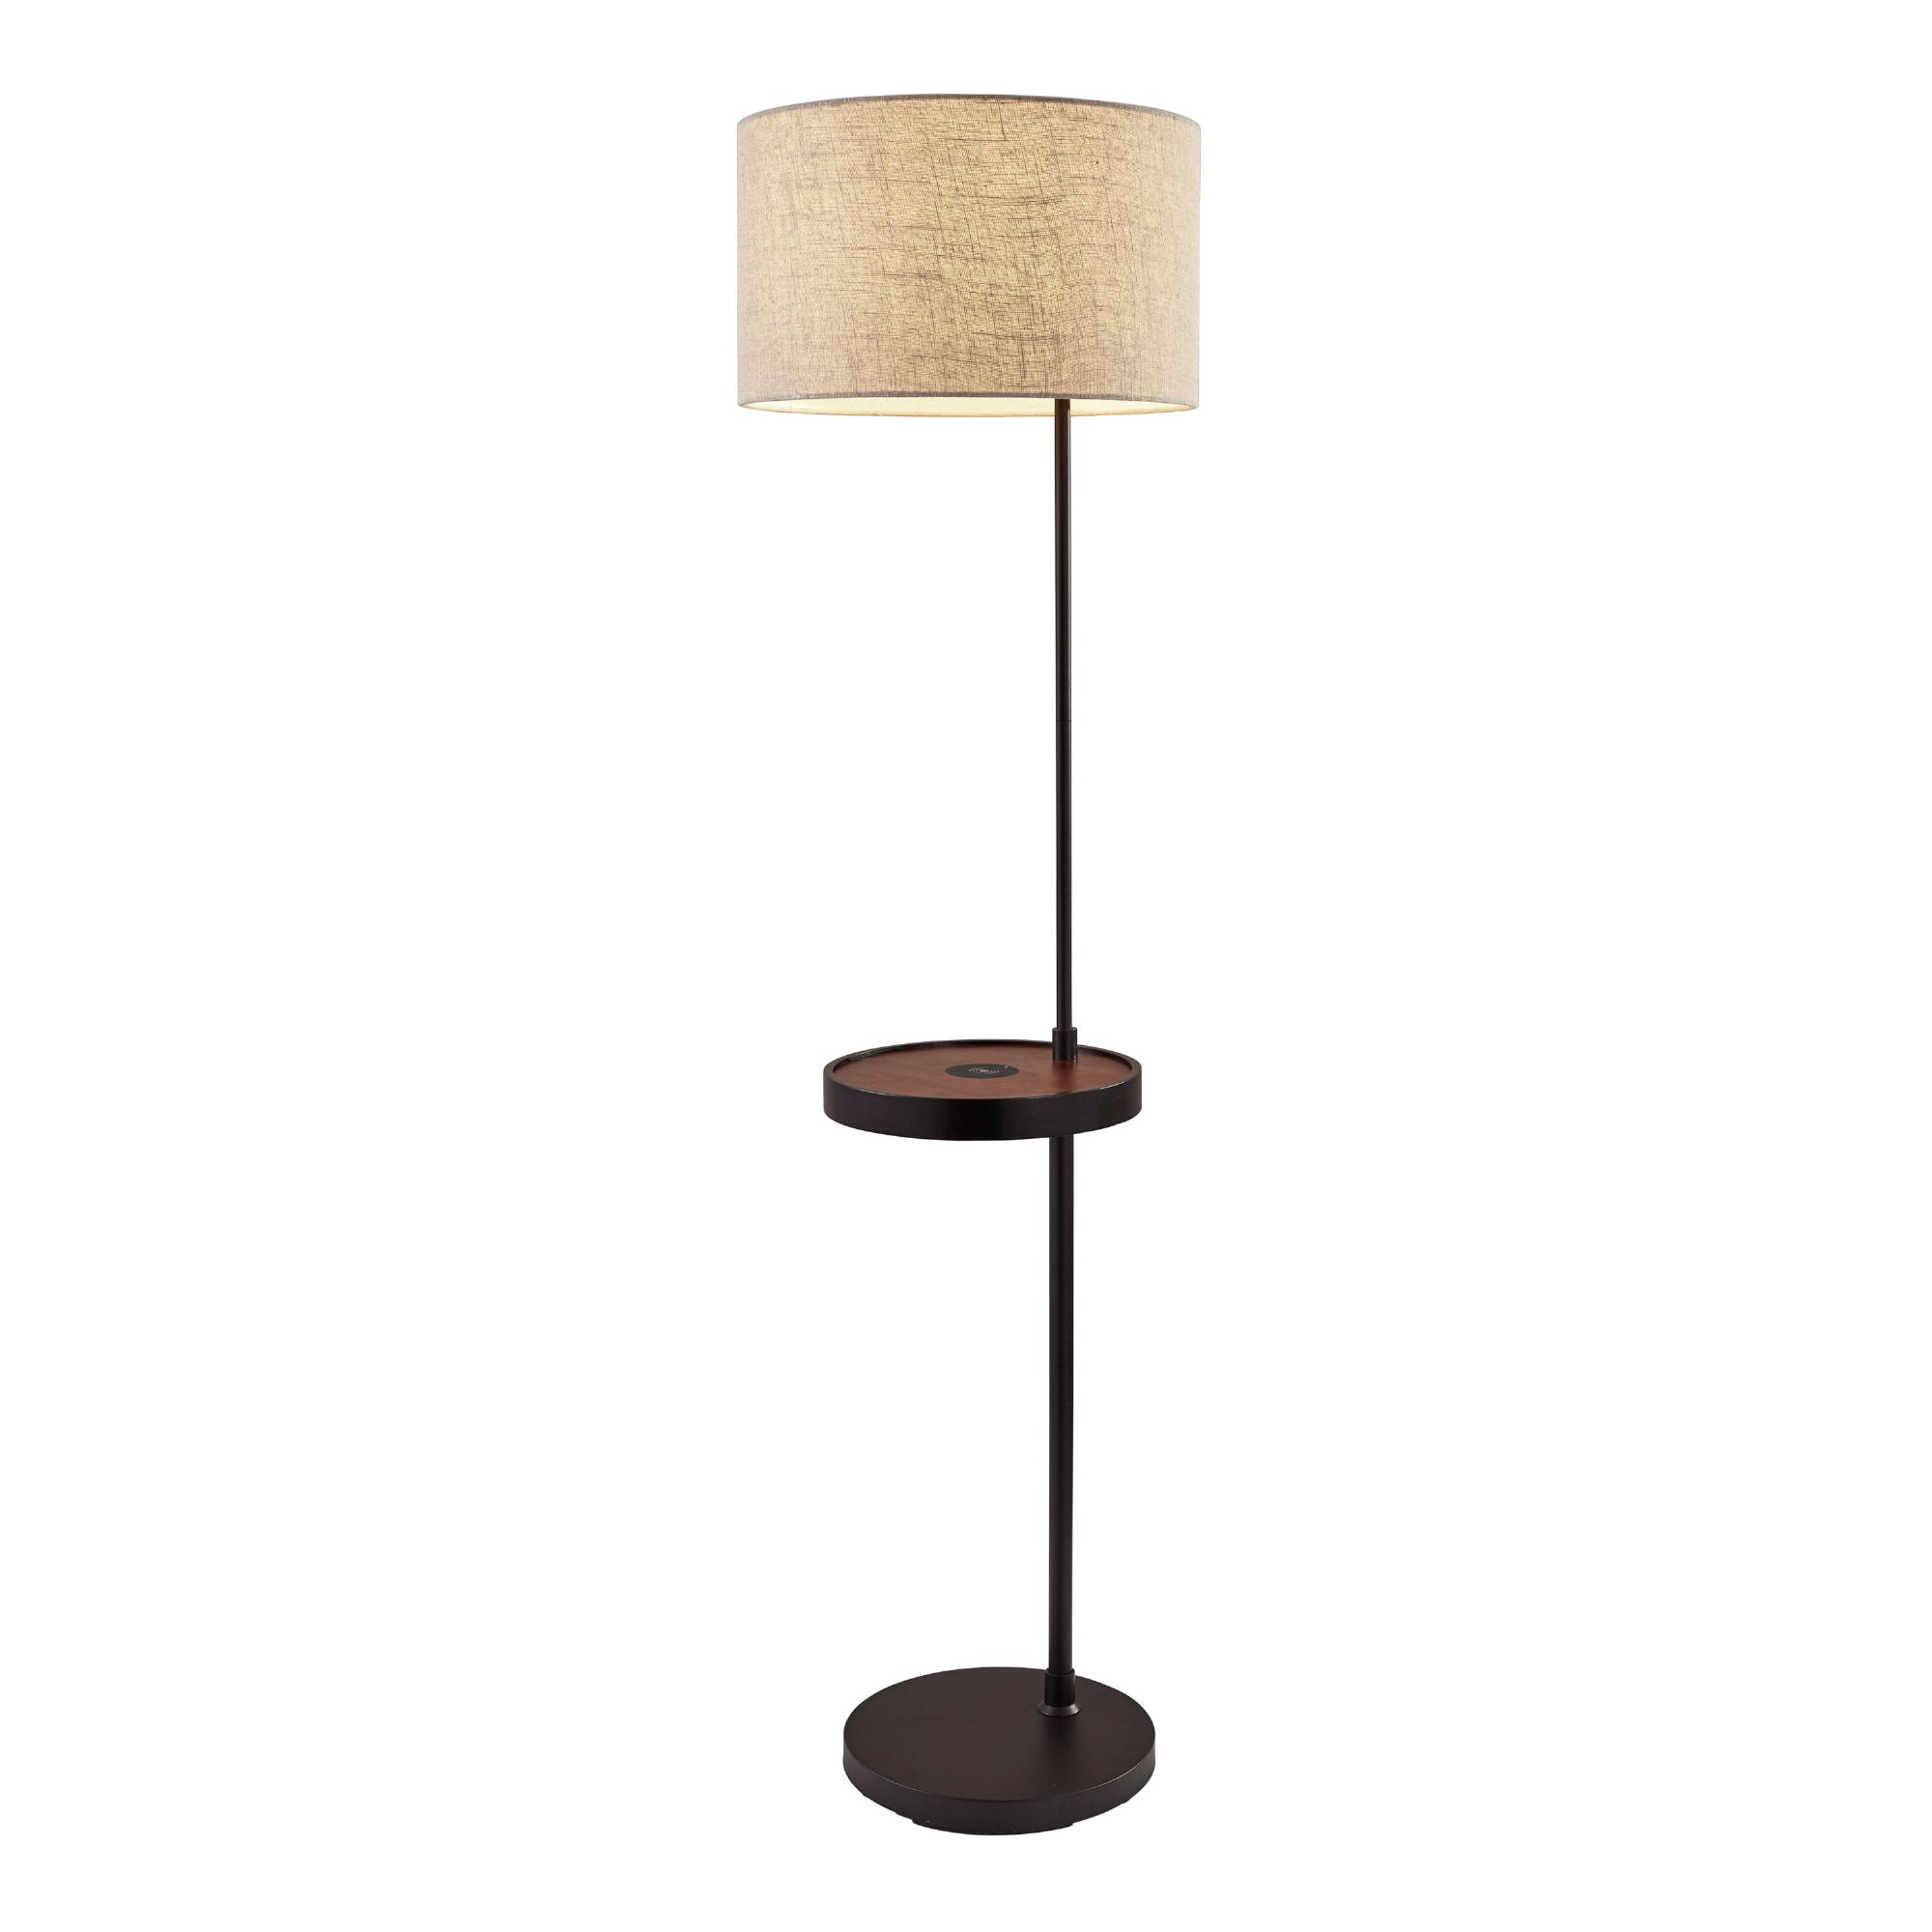 Walnut Bourne Floor Lamp with Shelf, USB and Charging Pad: Black/Brown by World Market